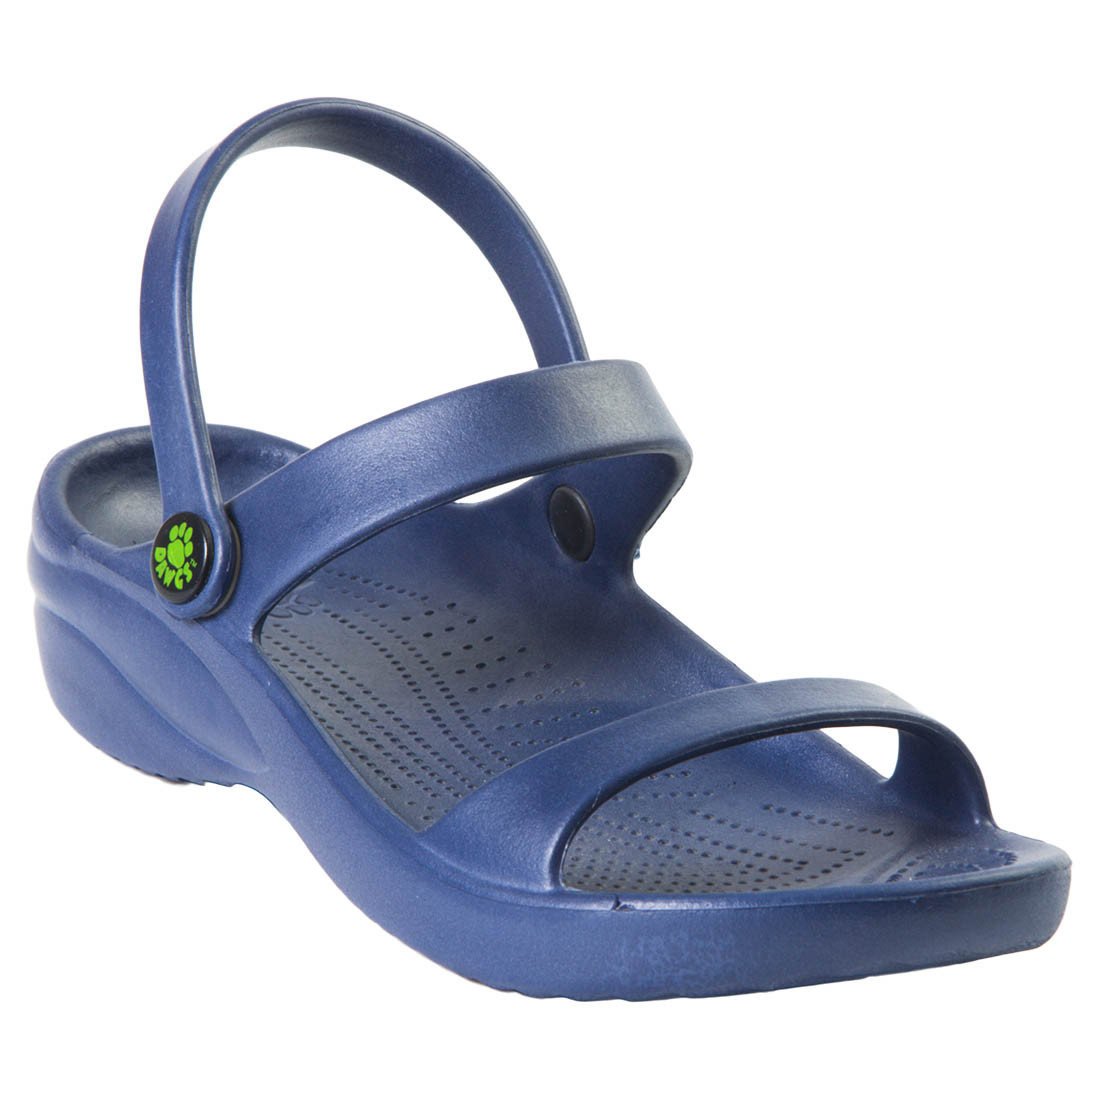 Women's 3-Strap Sandals - Navy by DAWGS USA